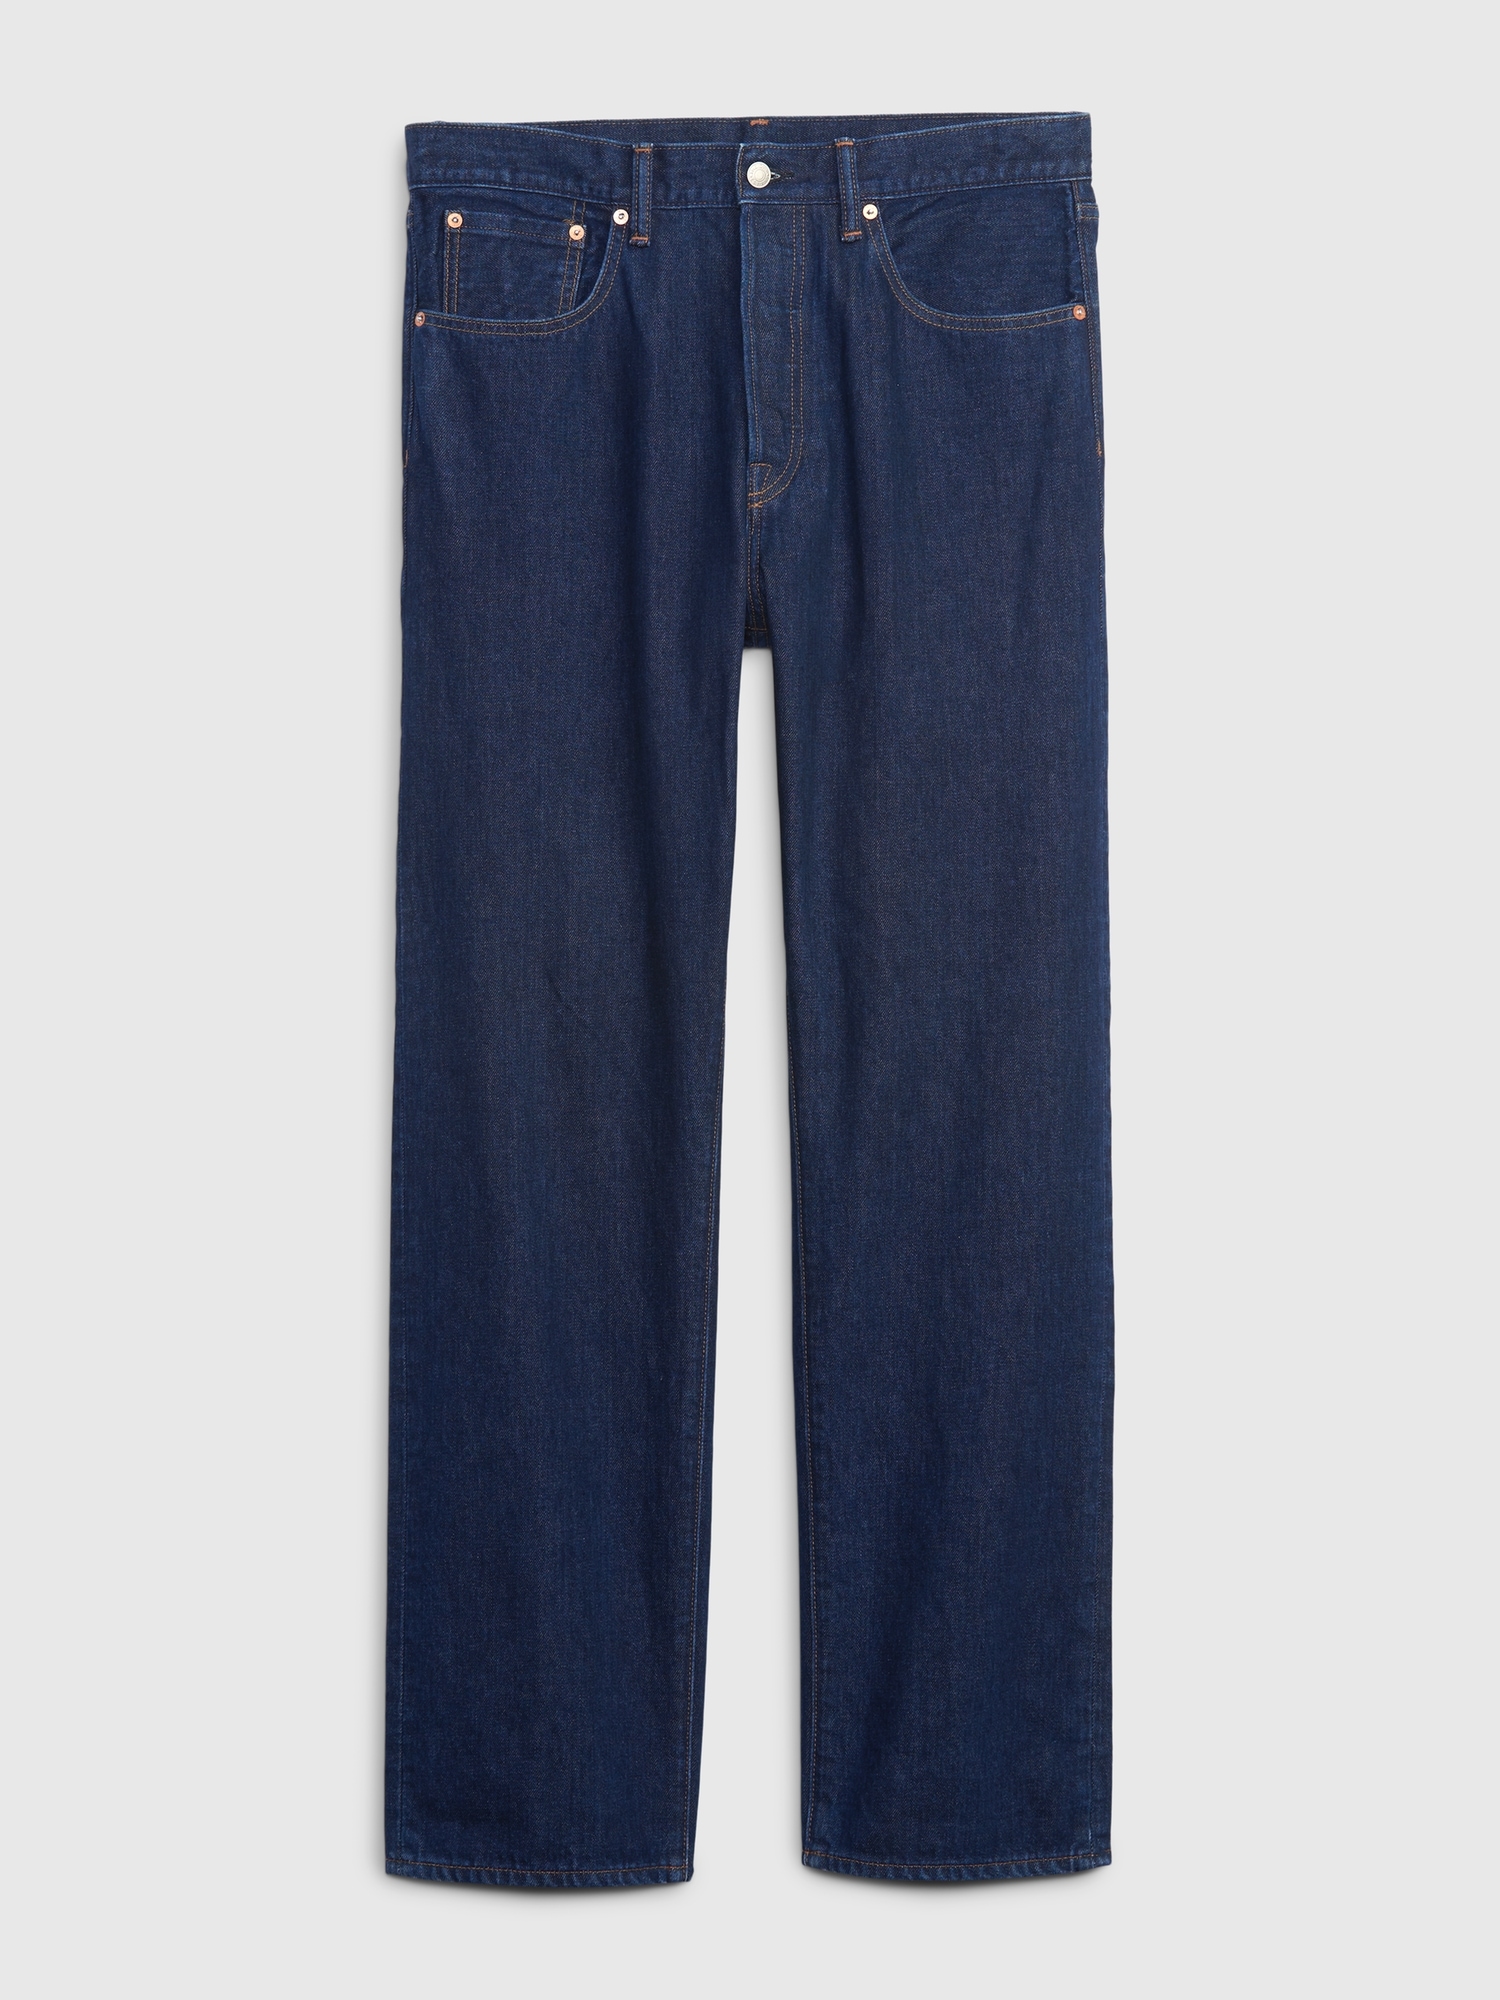 Organic Cotton Button Fly '90s Original Straight Fit Jeans | Gap